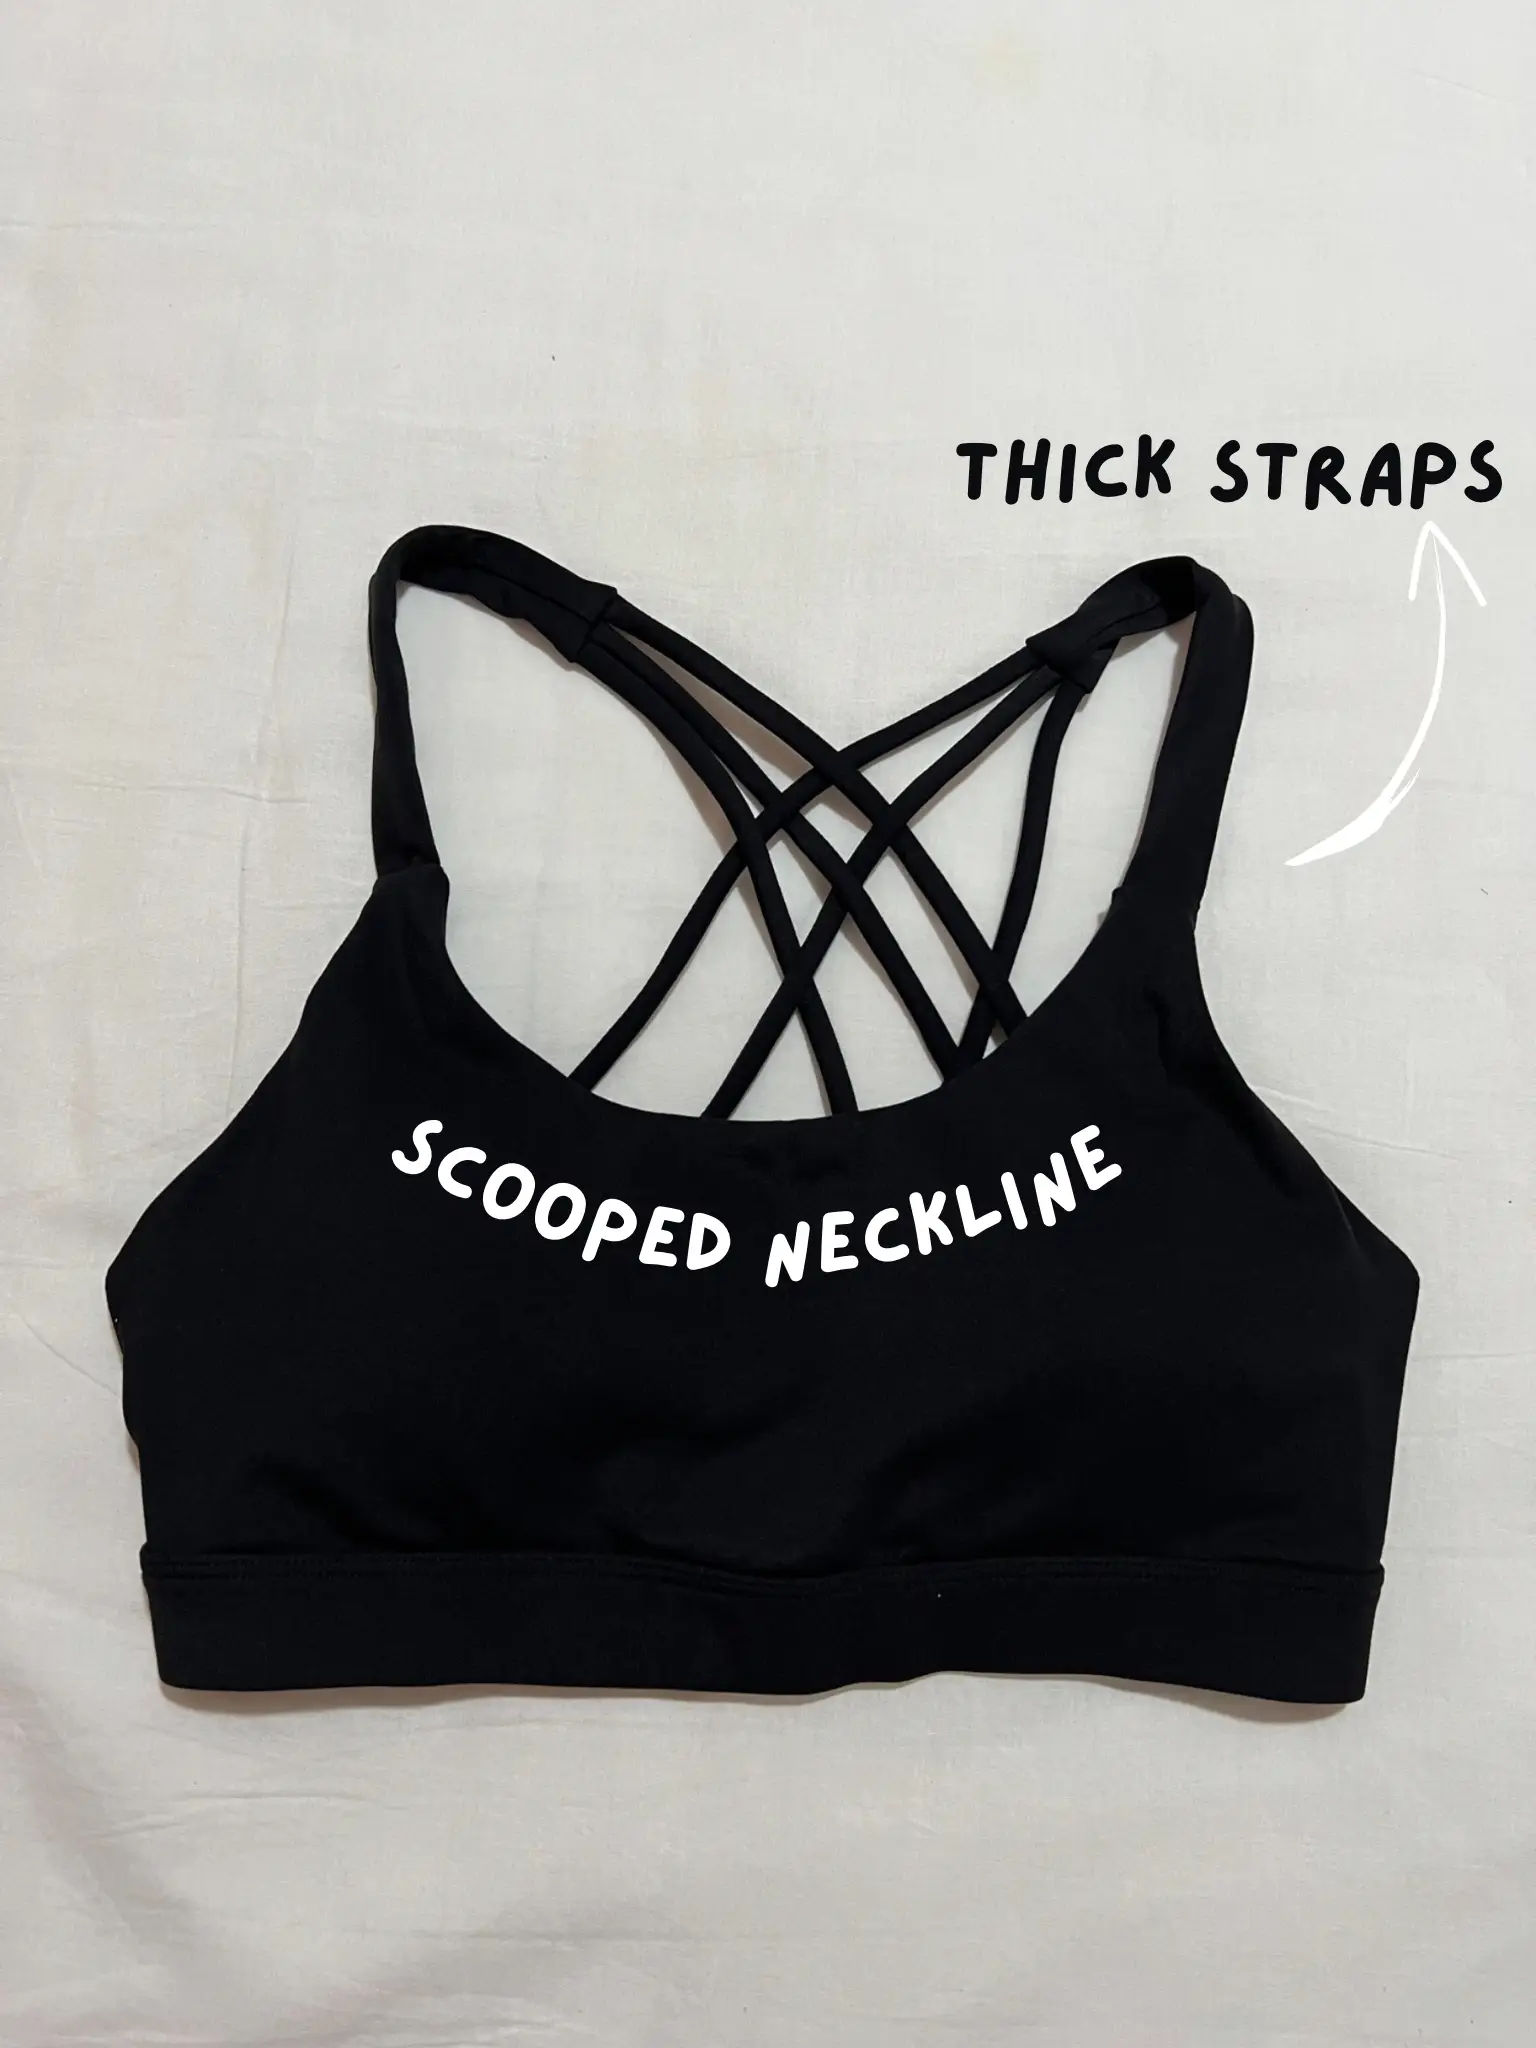 for all my gym girlies who want an open back sports bra but need paddi